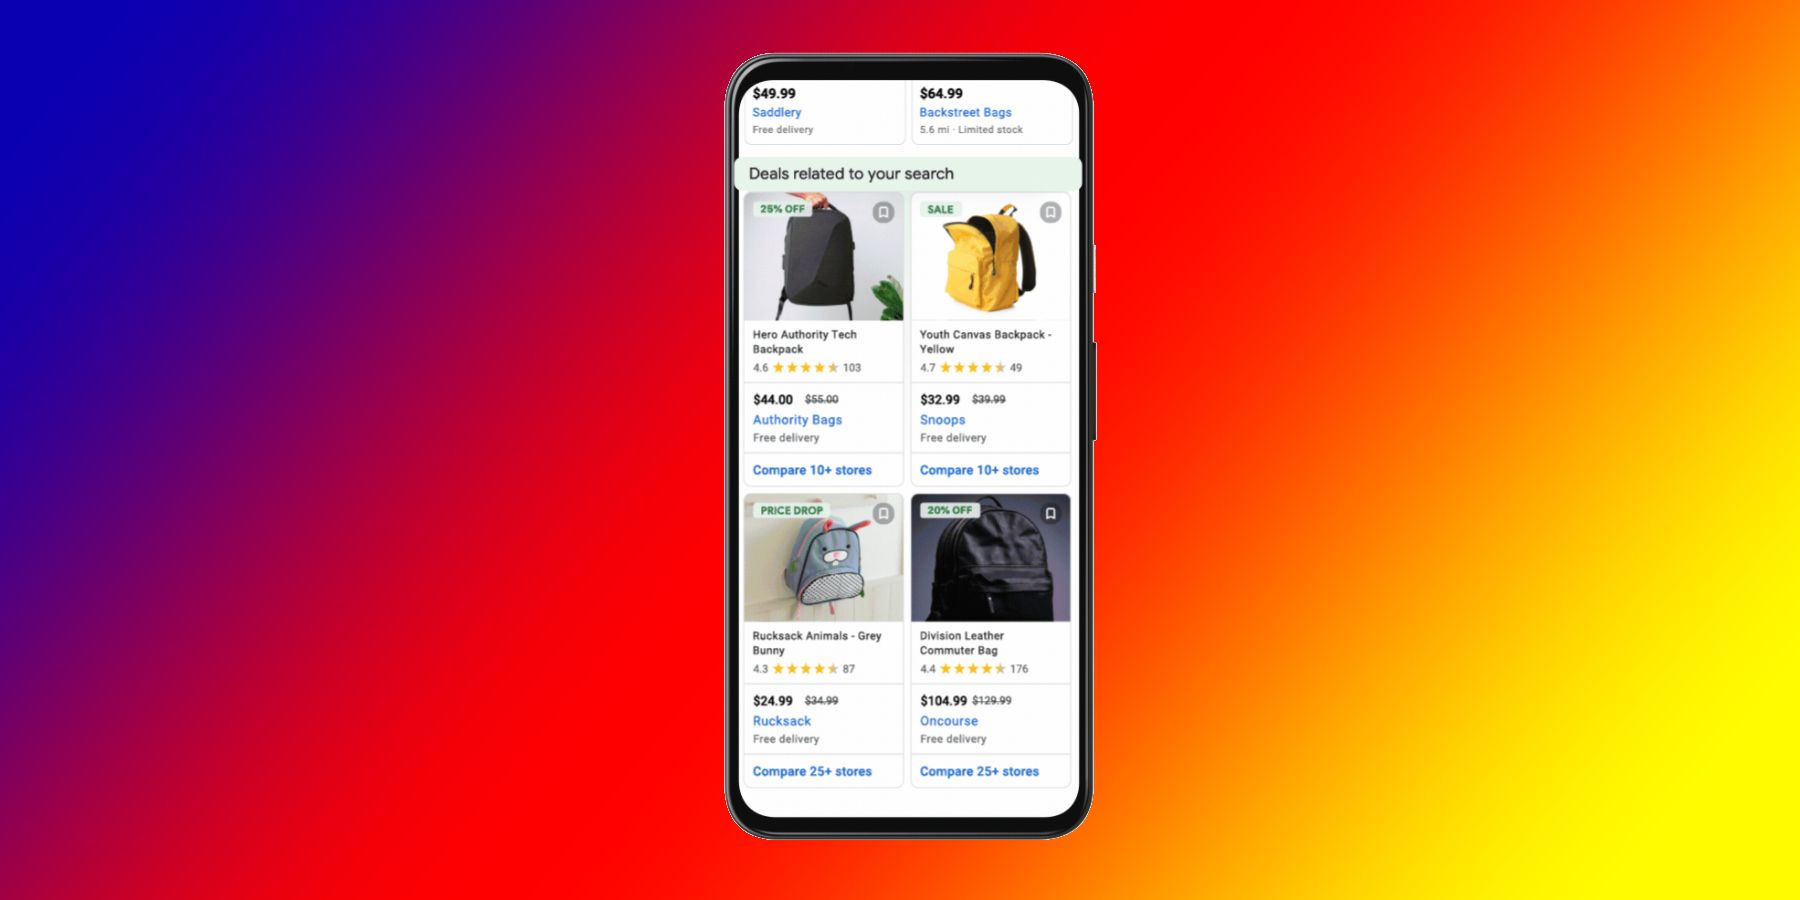 Google Search Shopping Experience Improvements